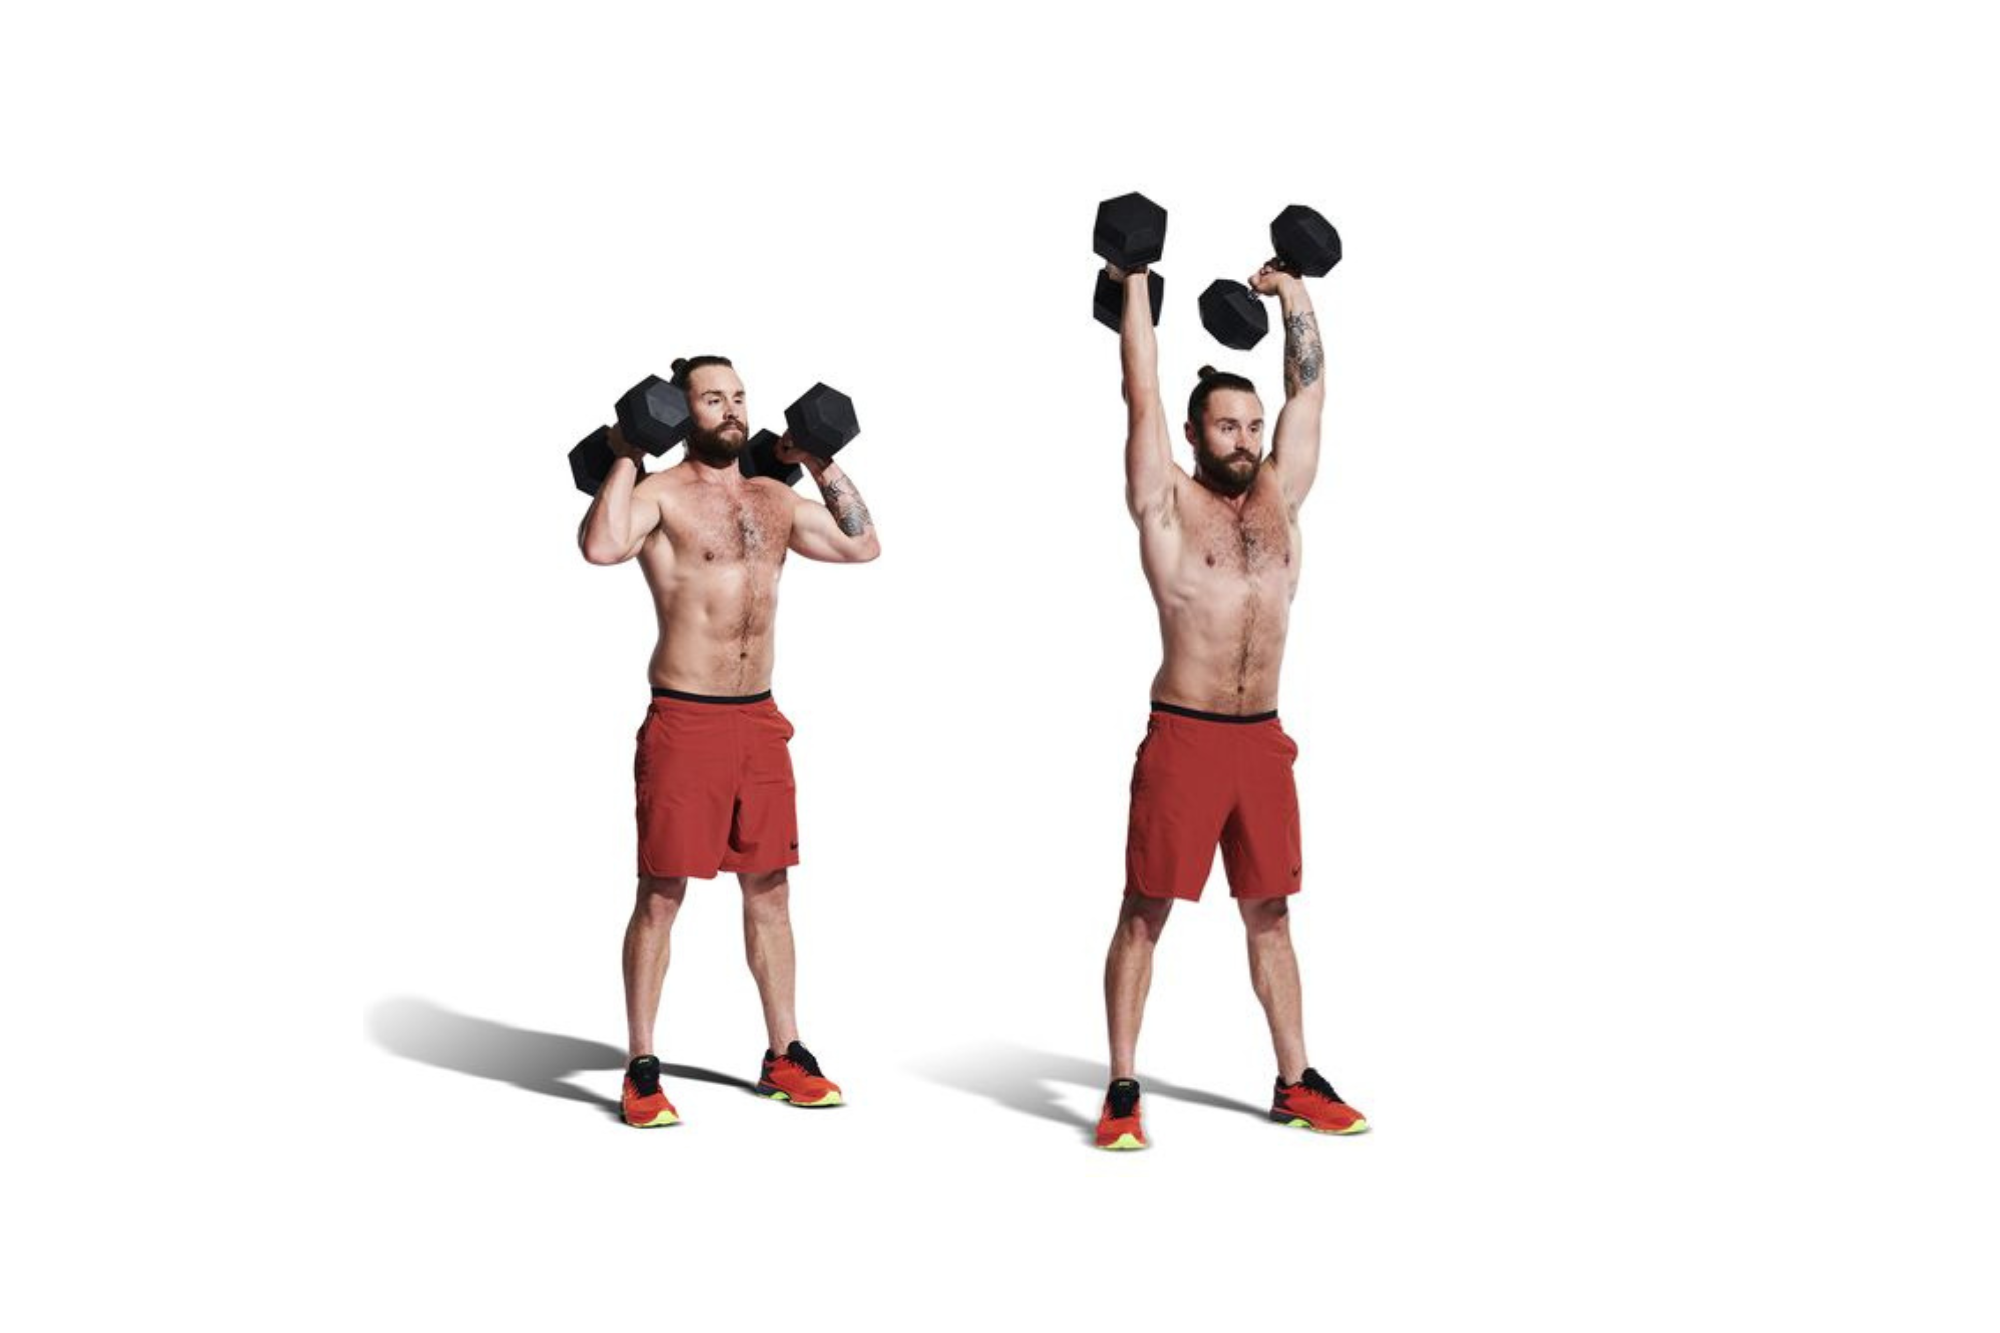 Easy And Effective 5 or 15 Minute Dumbbell Arm Workout